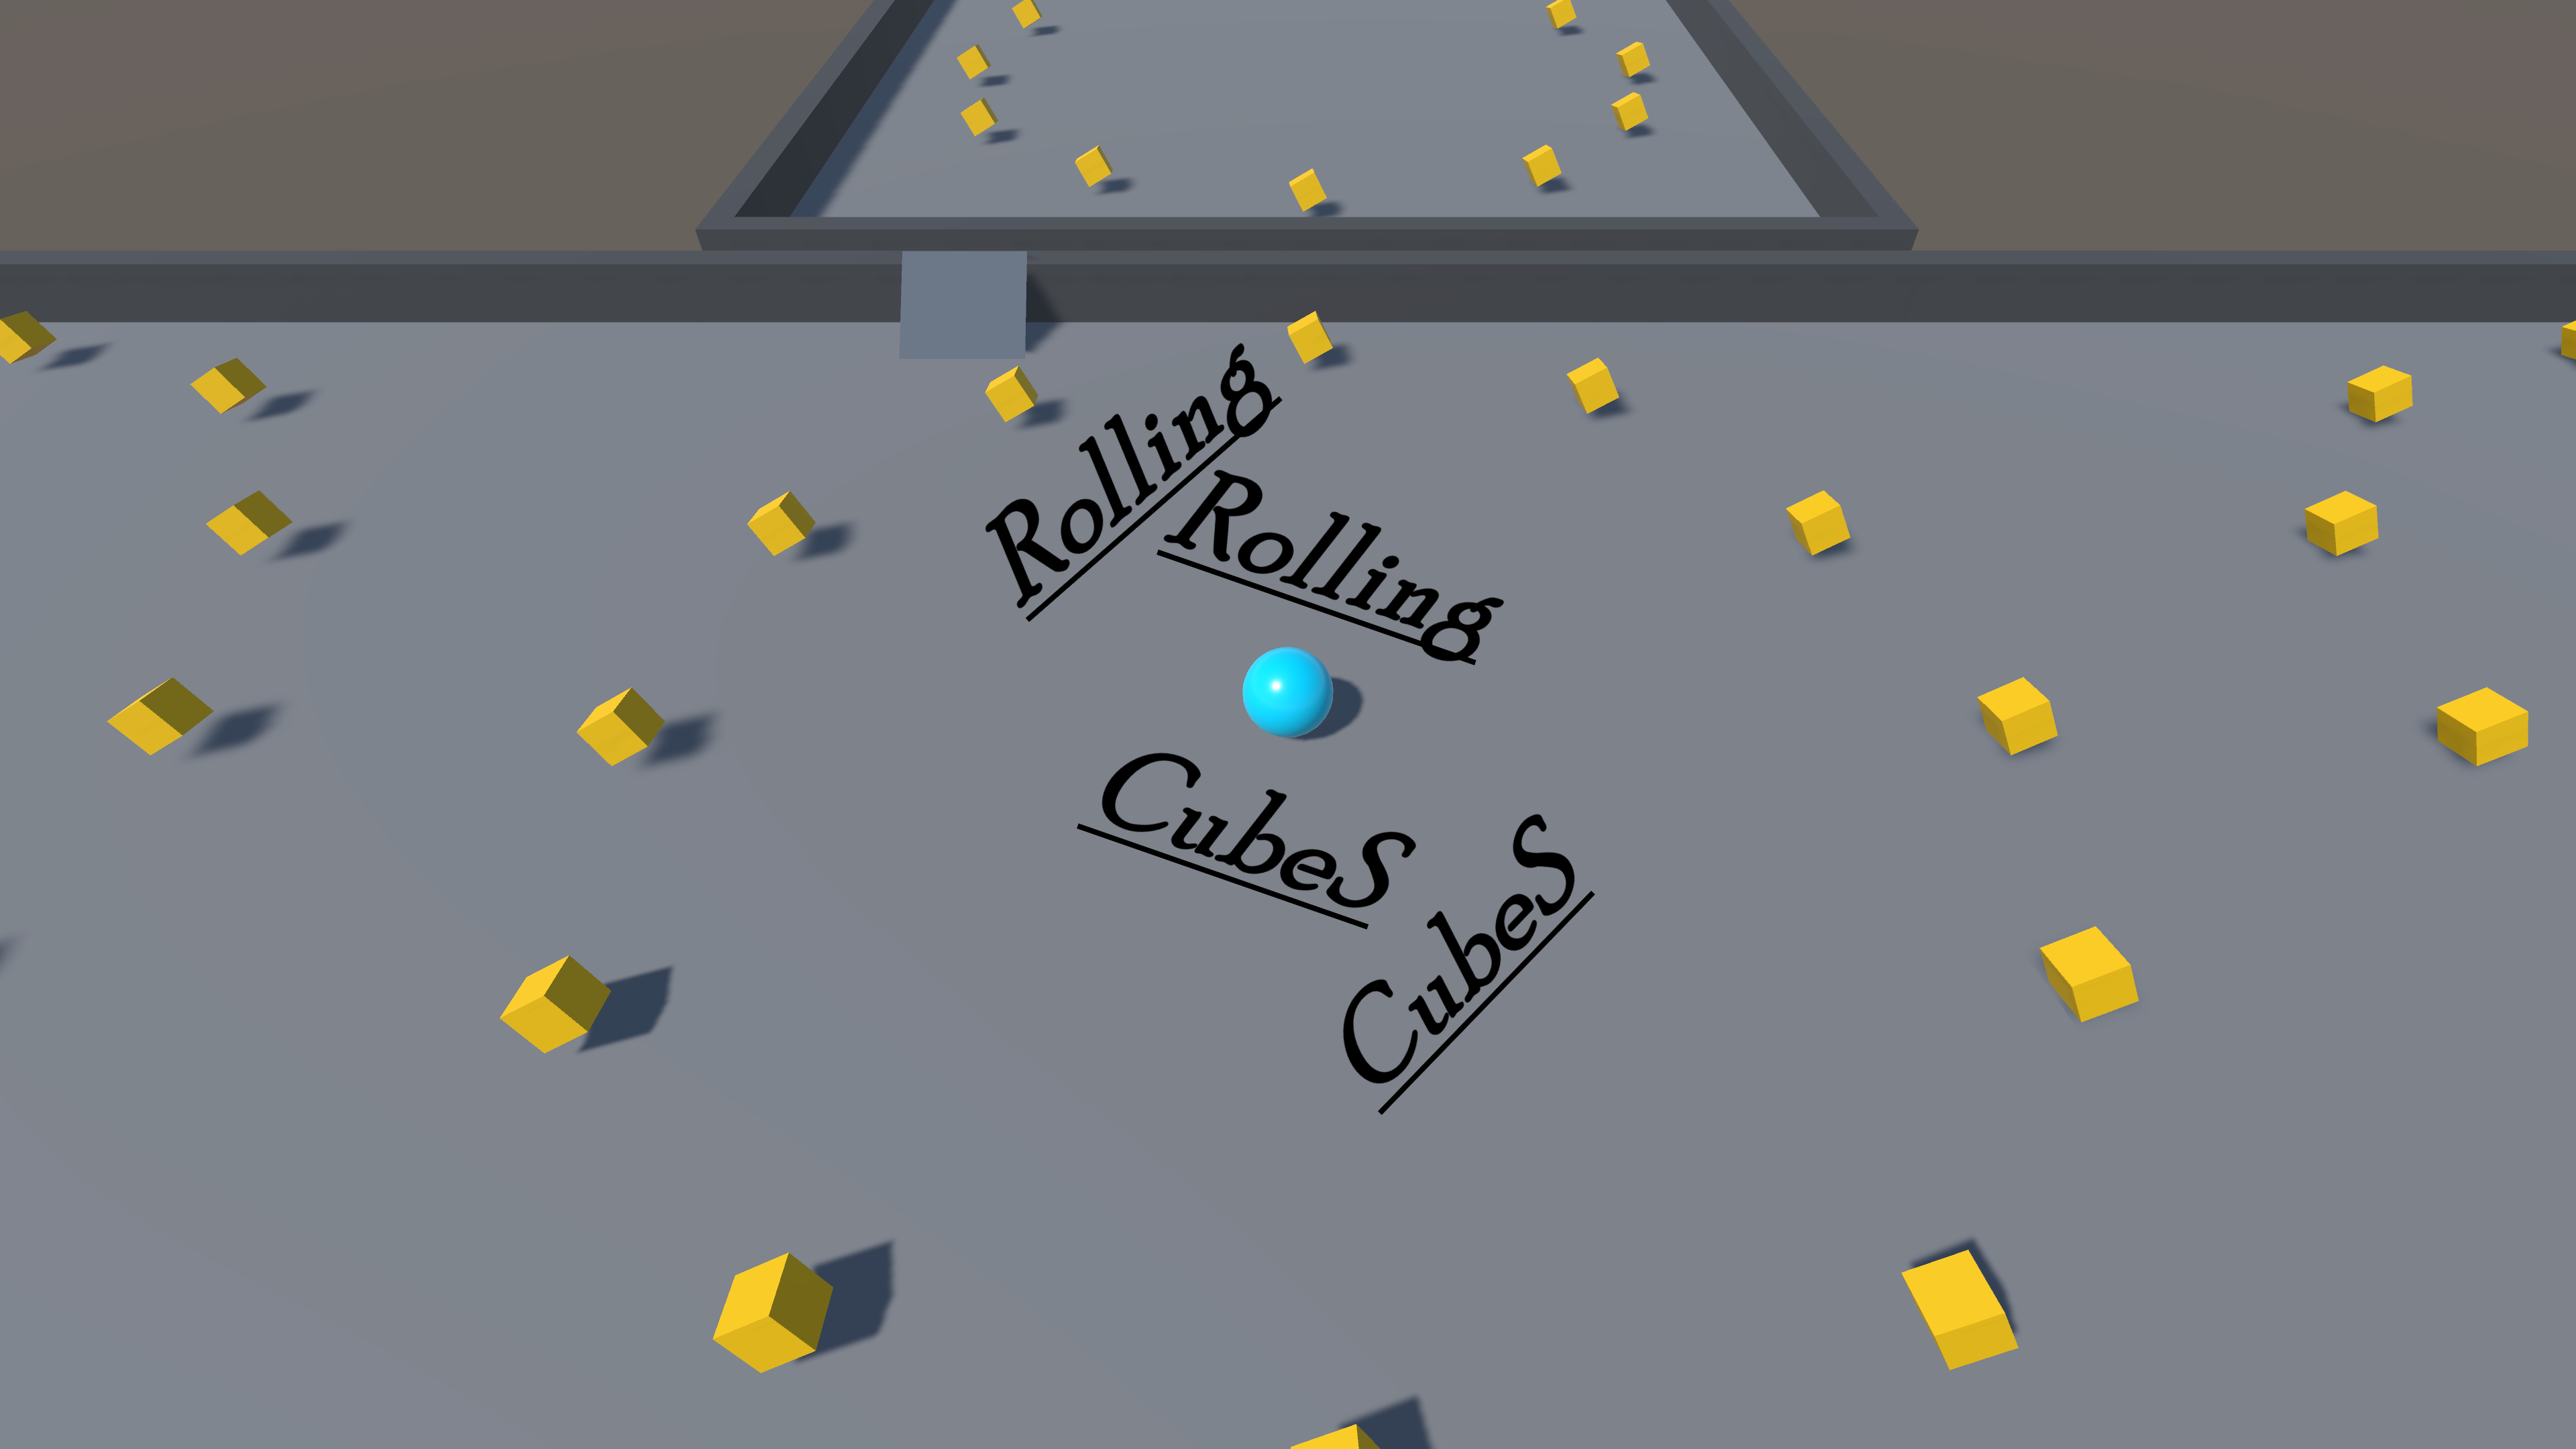 Rolling Cubes